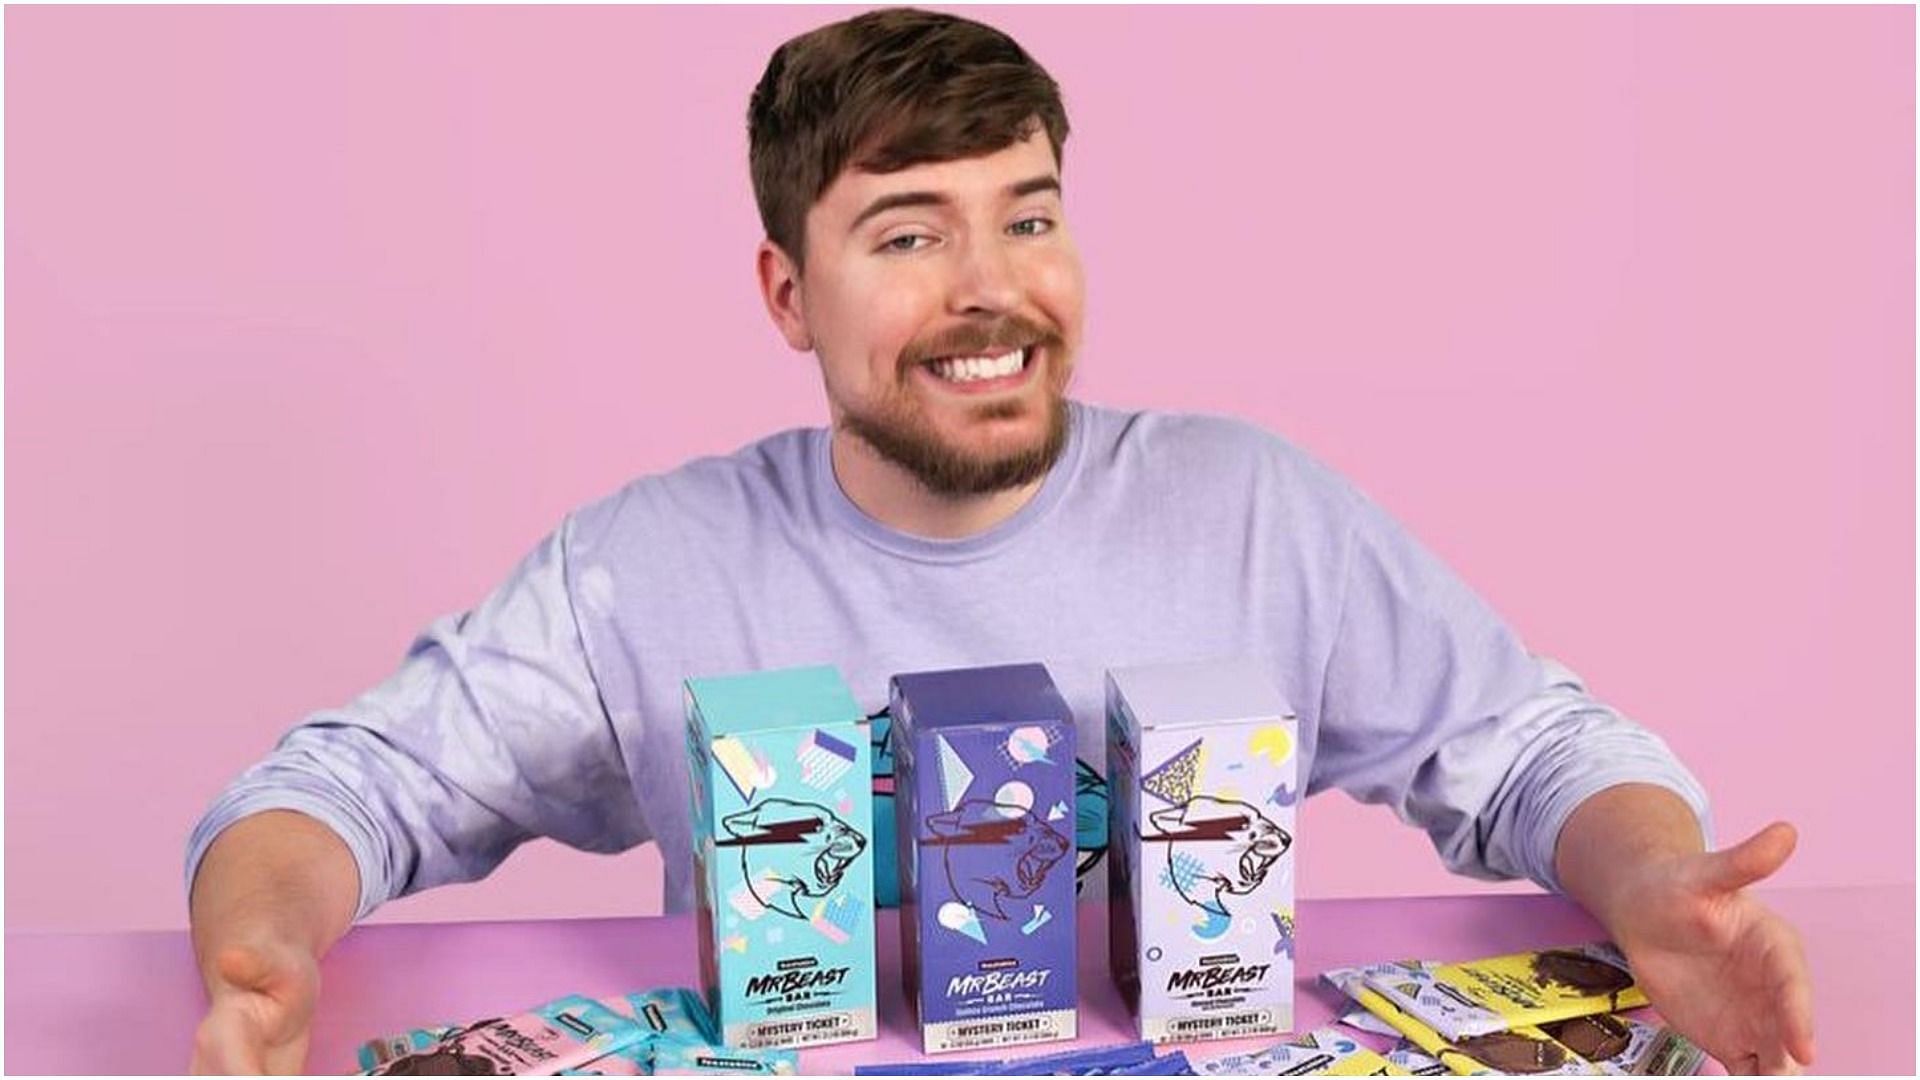 MrBeast gave away $1.3 million worth of chocolate in a Feastables promotional giveaway (Image via MrBeast/Twitter)